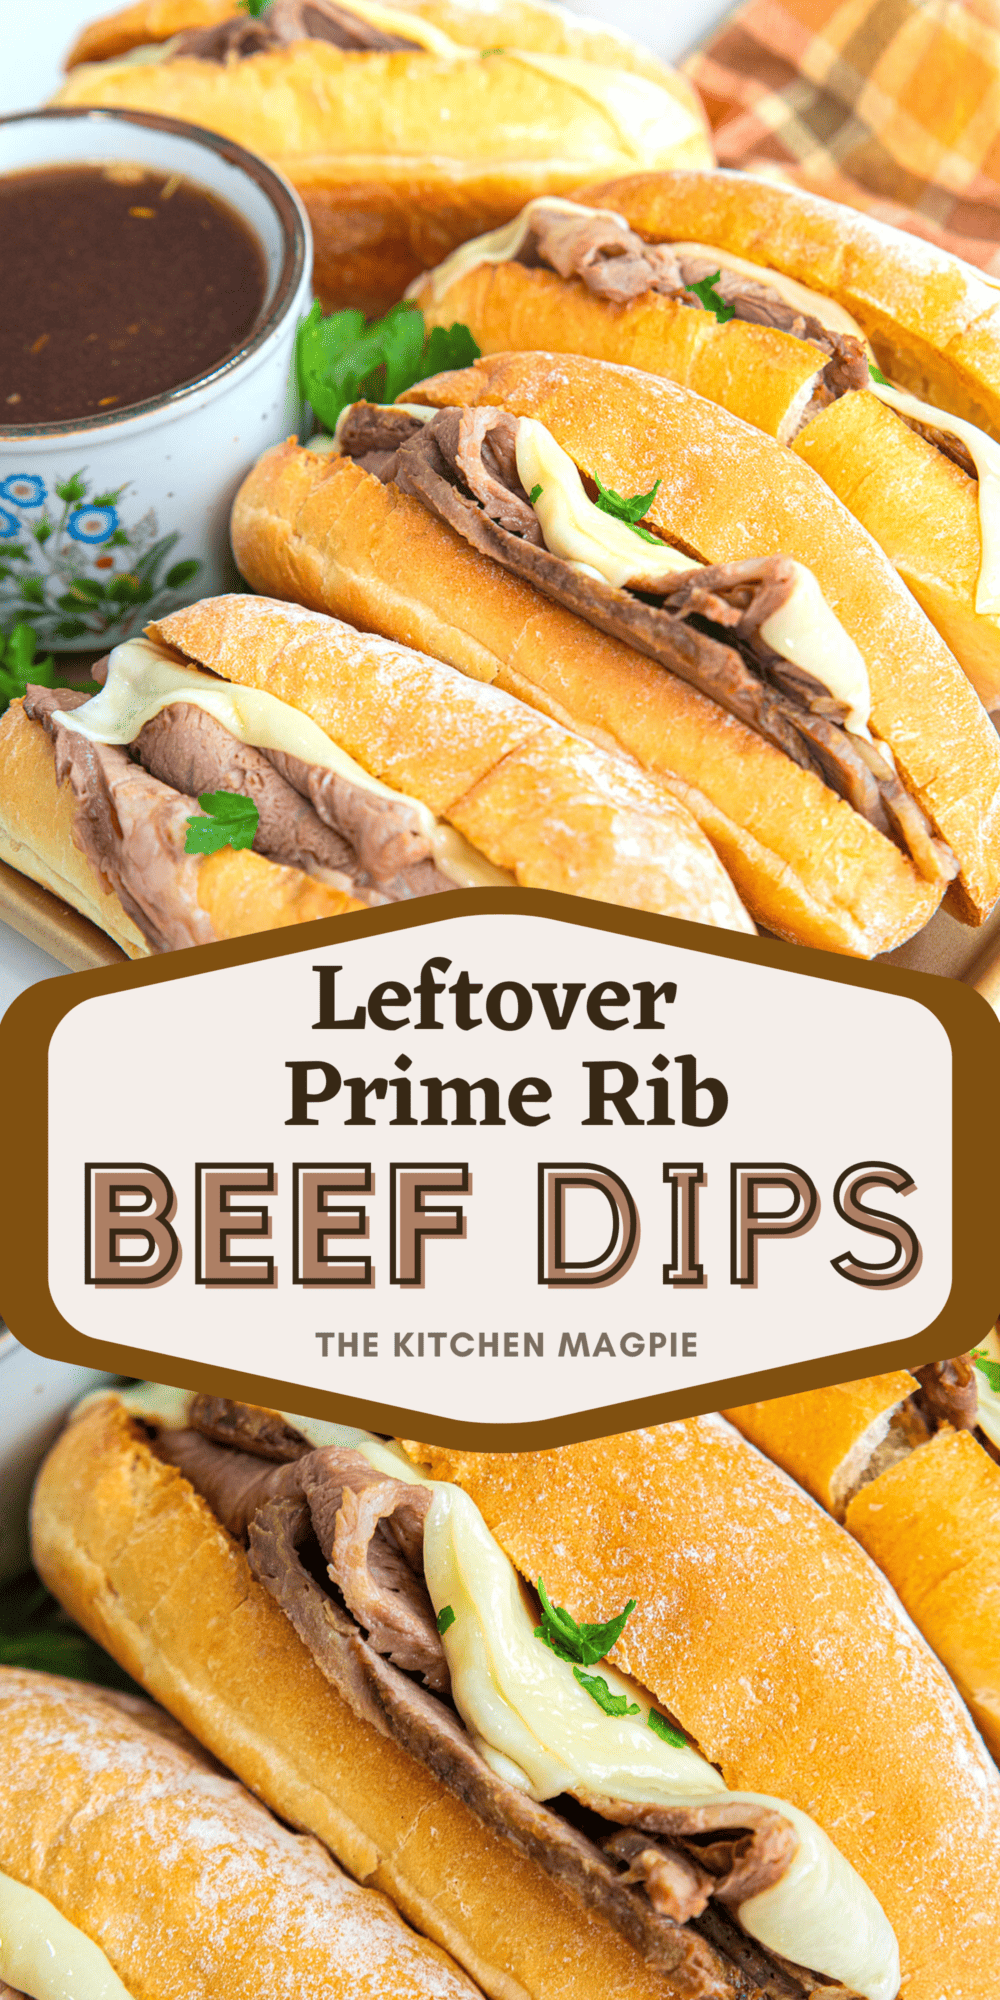 Use your leftover prime rib (or other sliceable beef roast) to make beef dip sandwiches. This method yields tender beef and perfect au jus!